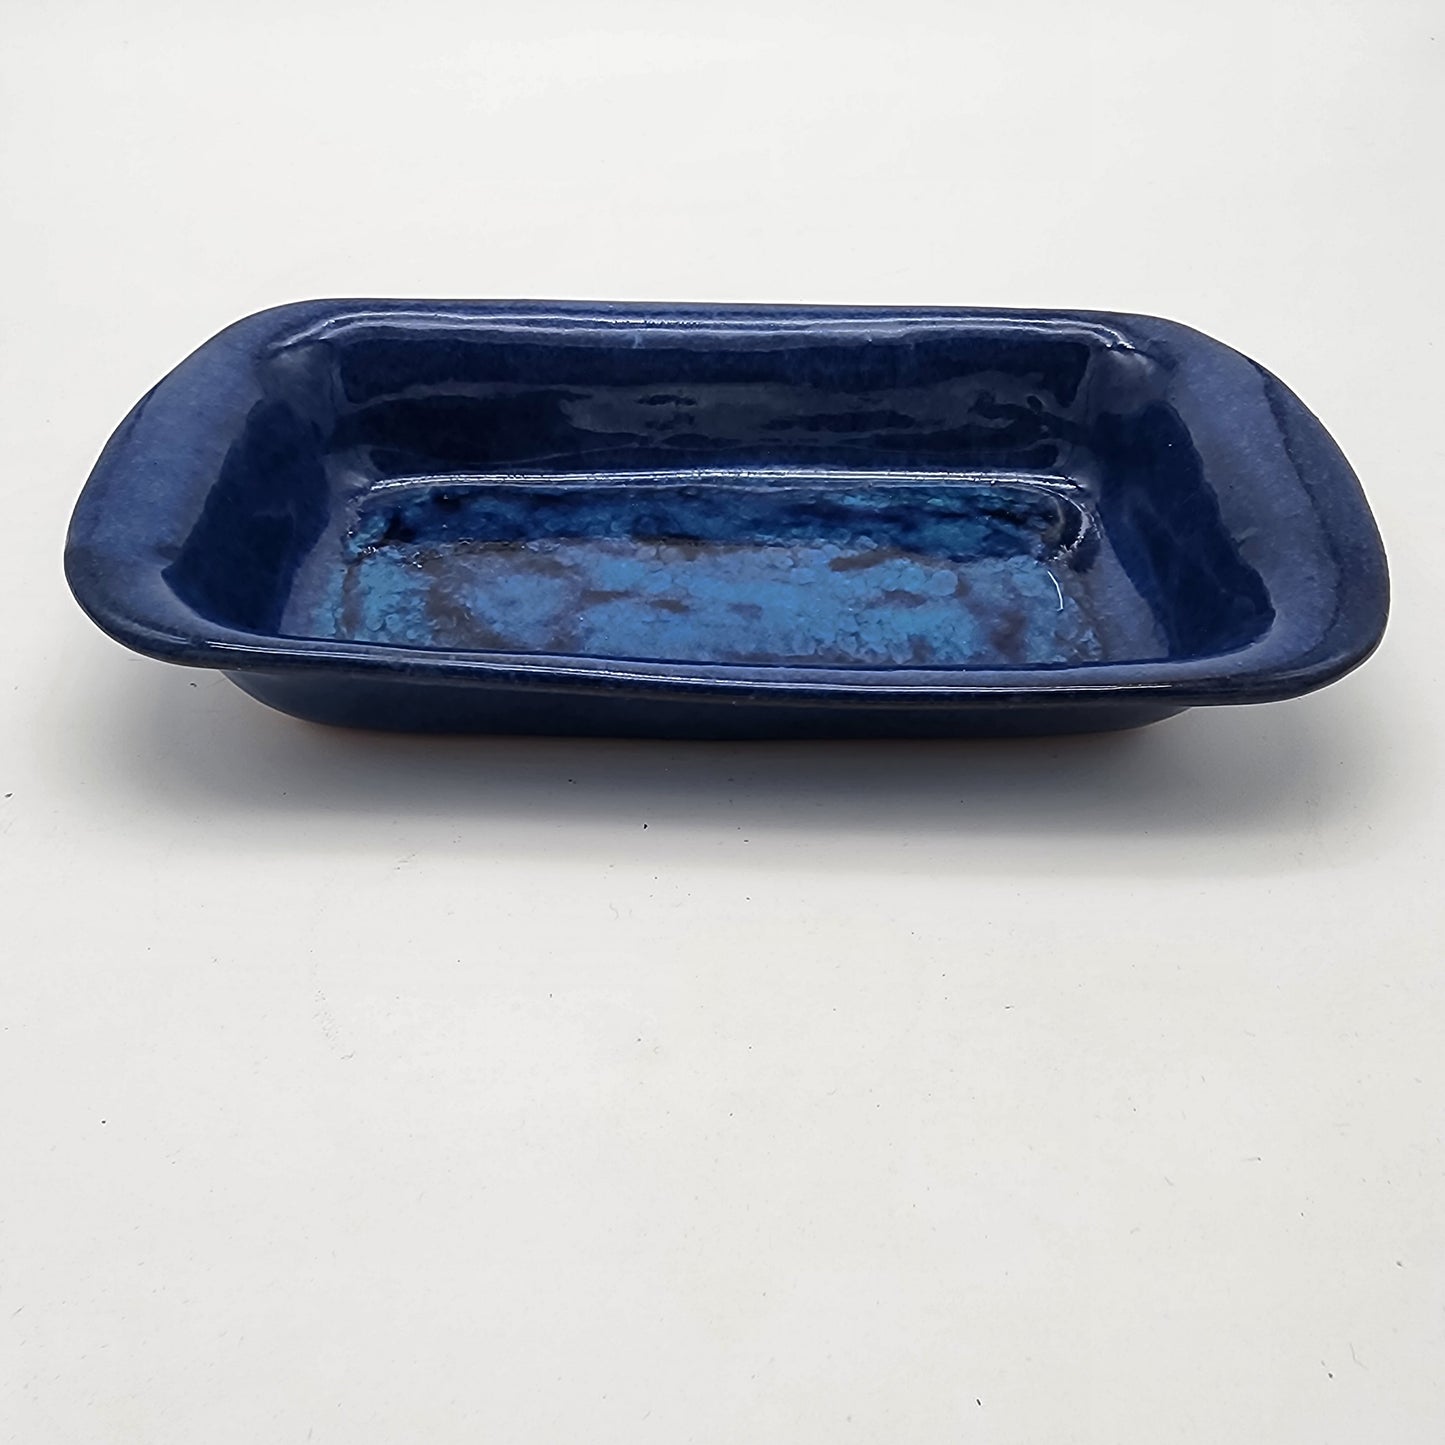 Bob Nuthouse Blue Pottery Baking or Serving Dish 3